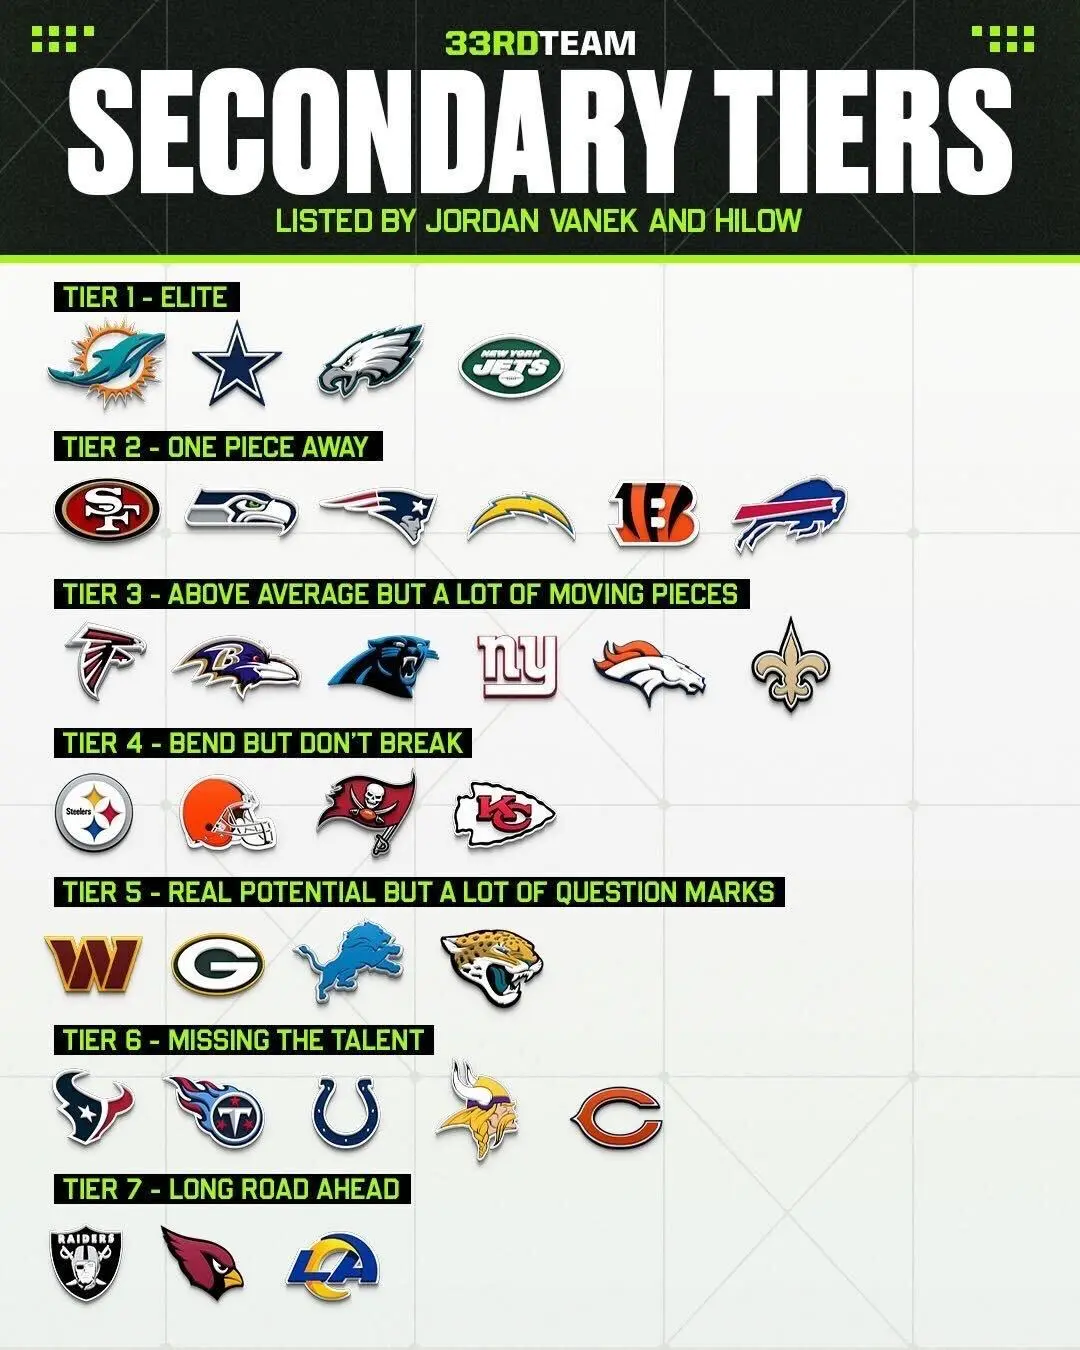 the nfl rankings